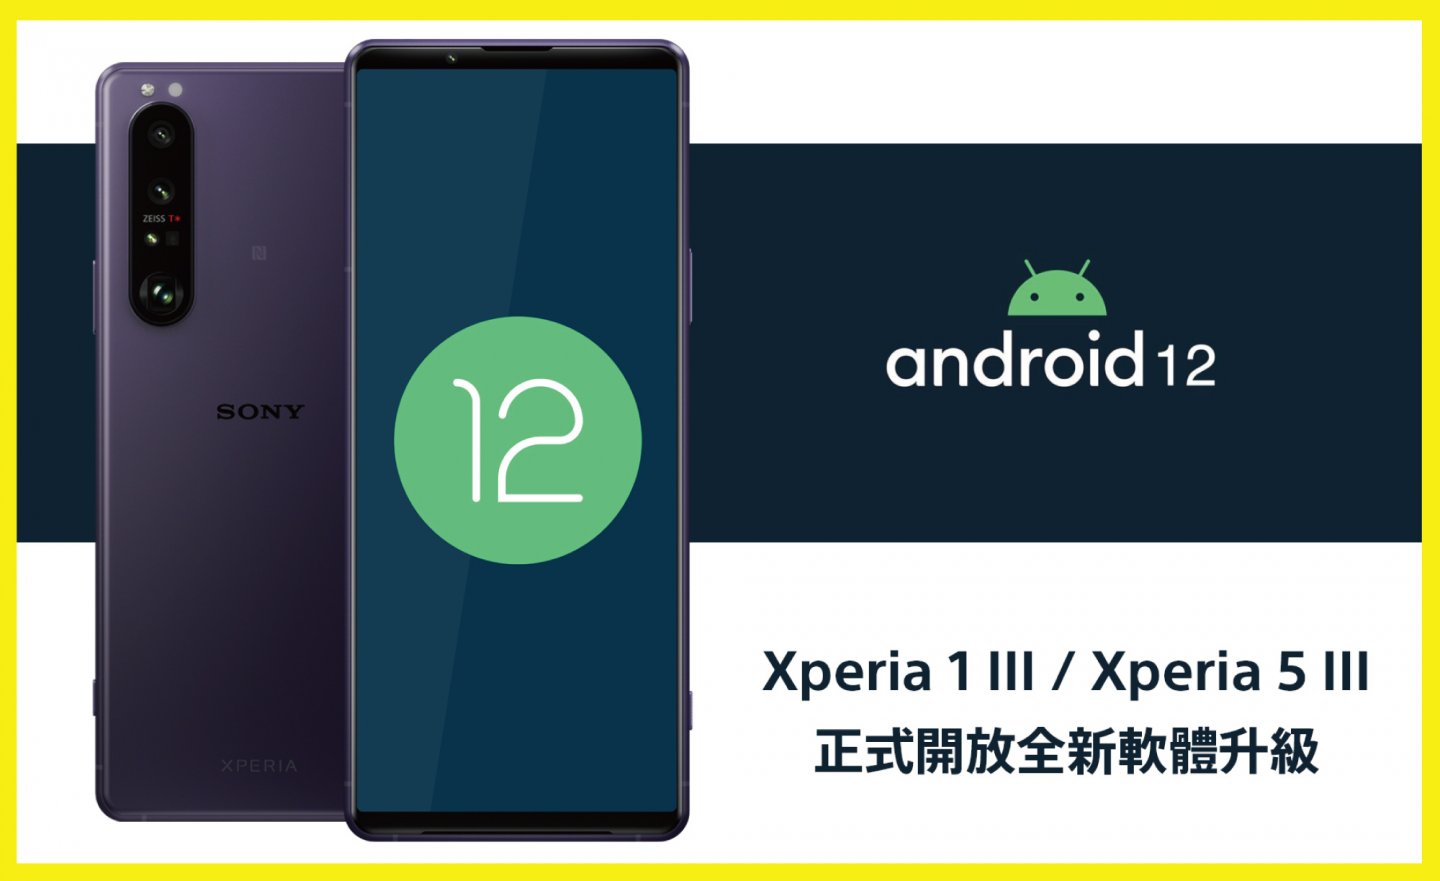 Sony Xperia 1 III、Xperia 5 III 快升級 Android 12，支援 PS5 手把 DualSense